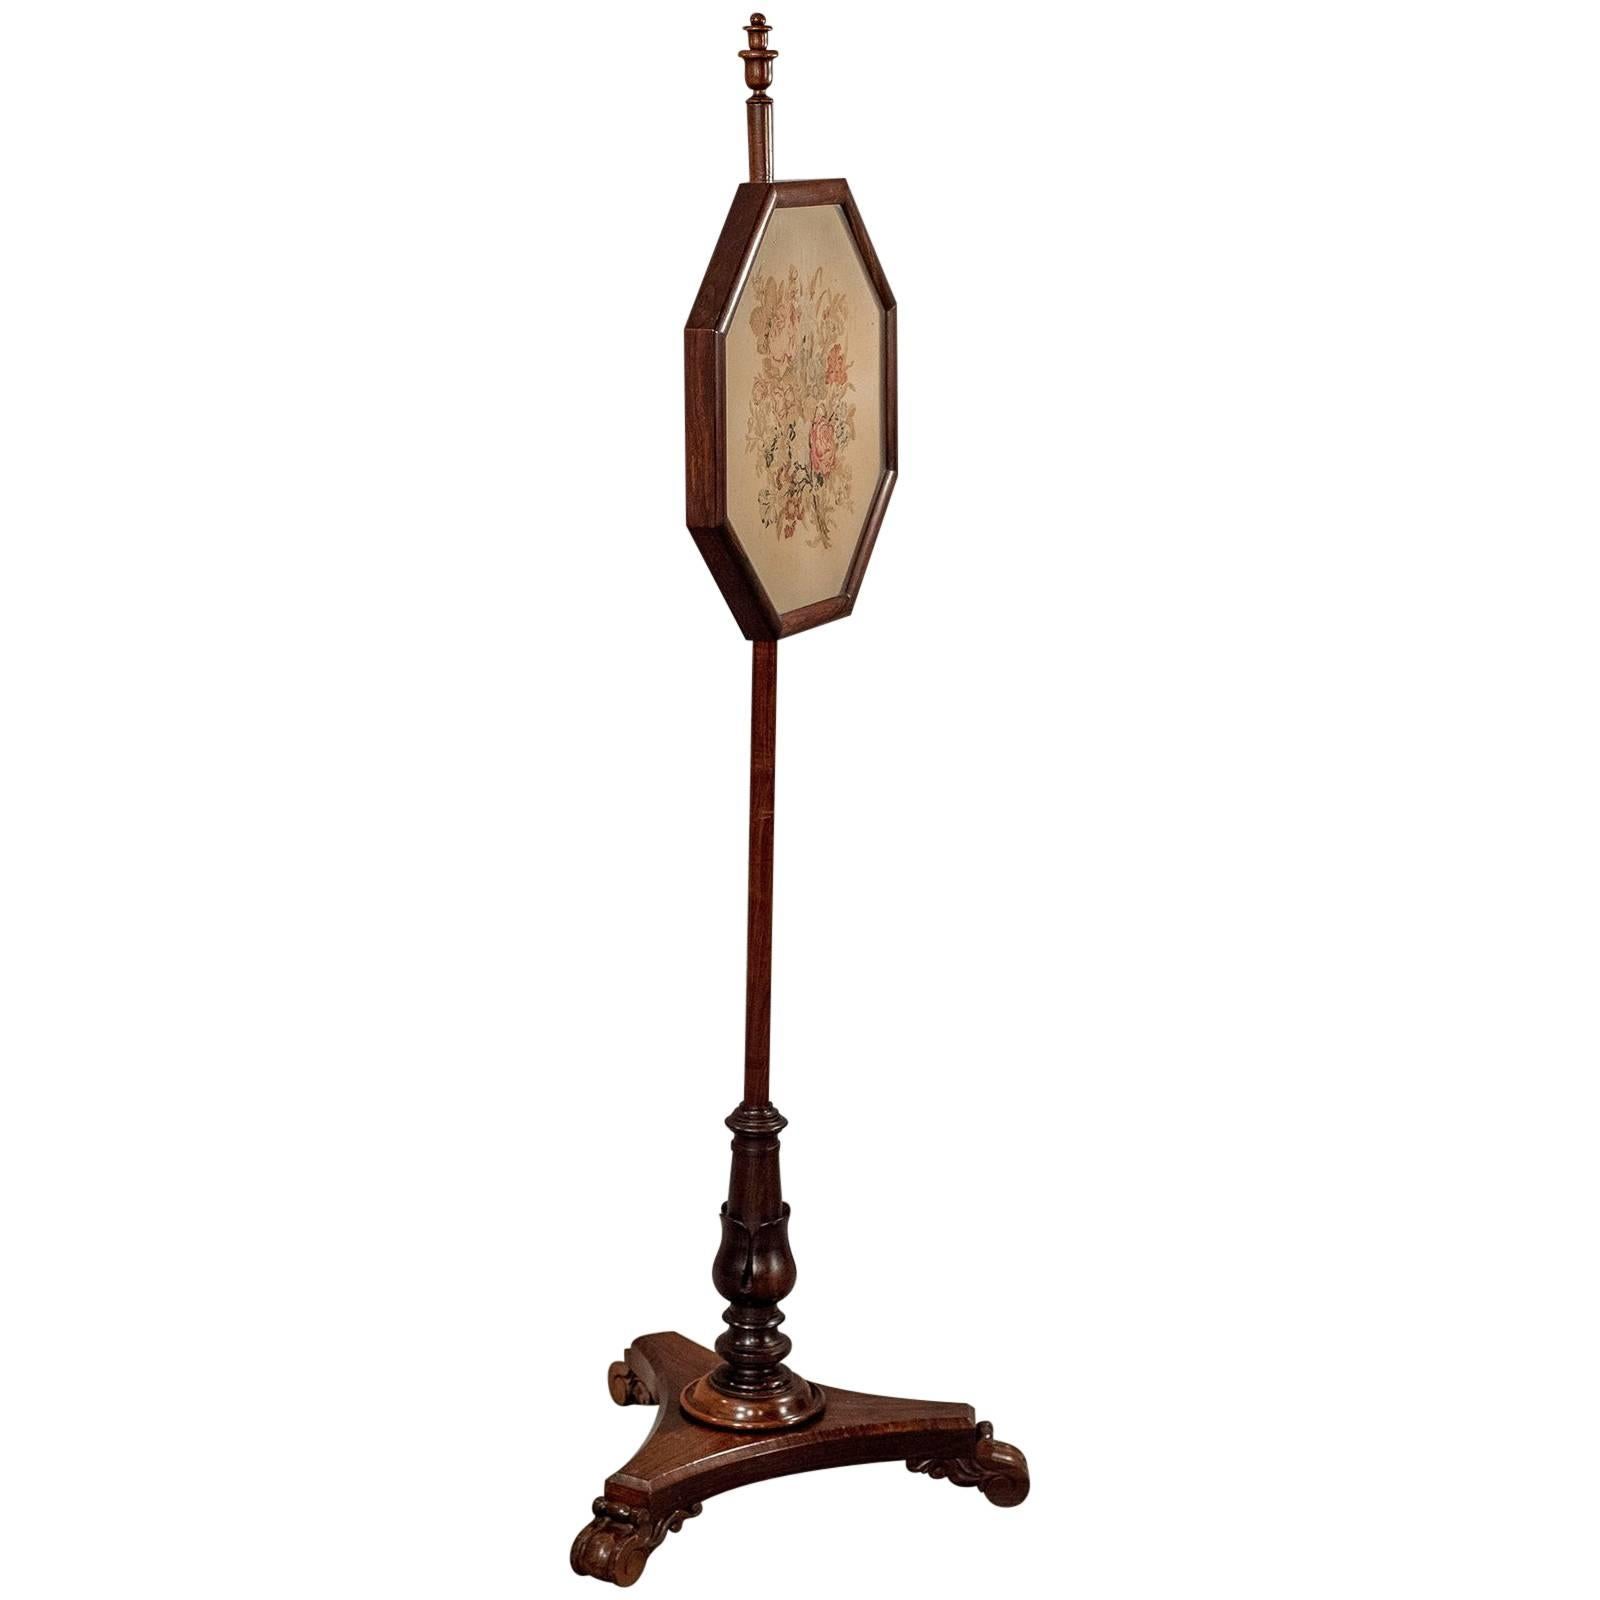 Antique Pole Screen Needlepoint Tapestry Stand Rosewood Regency, circa 1820